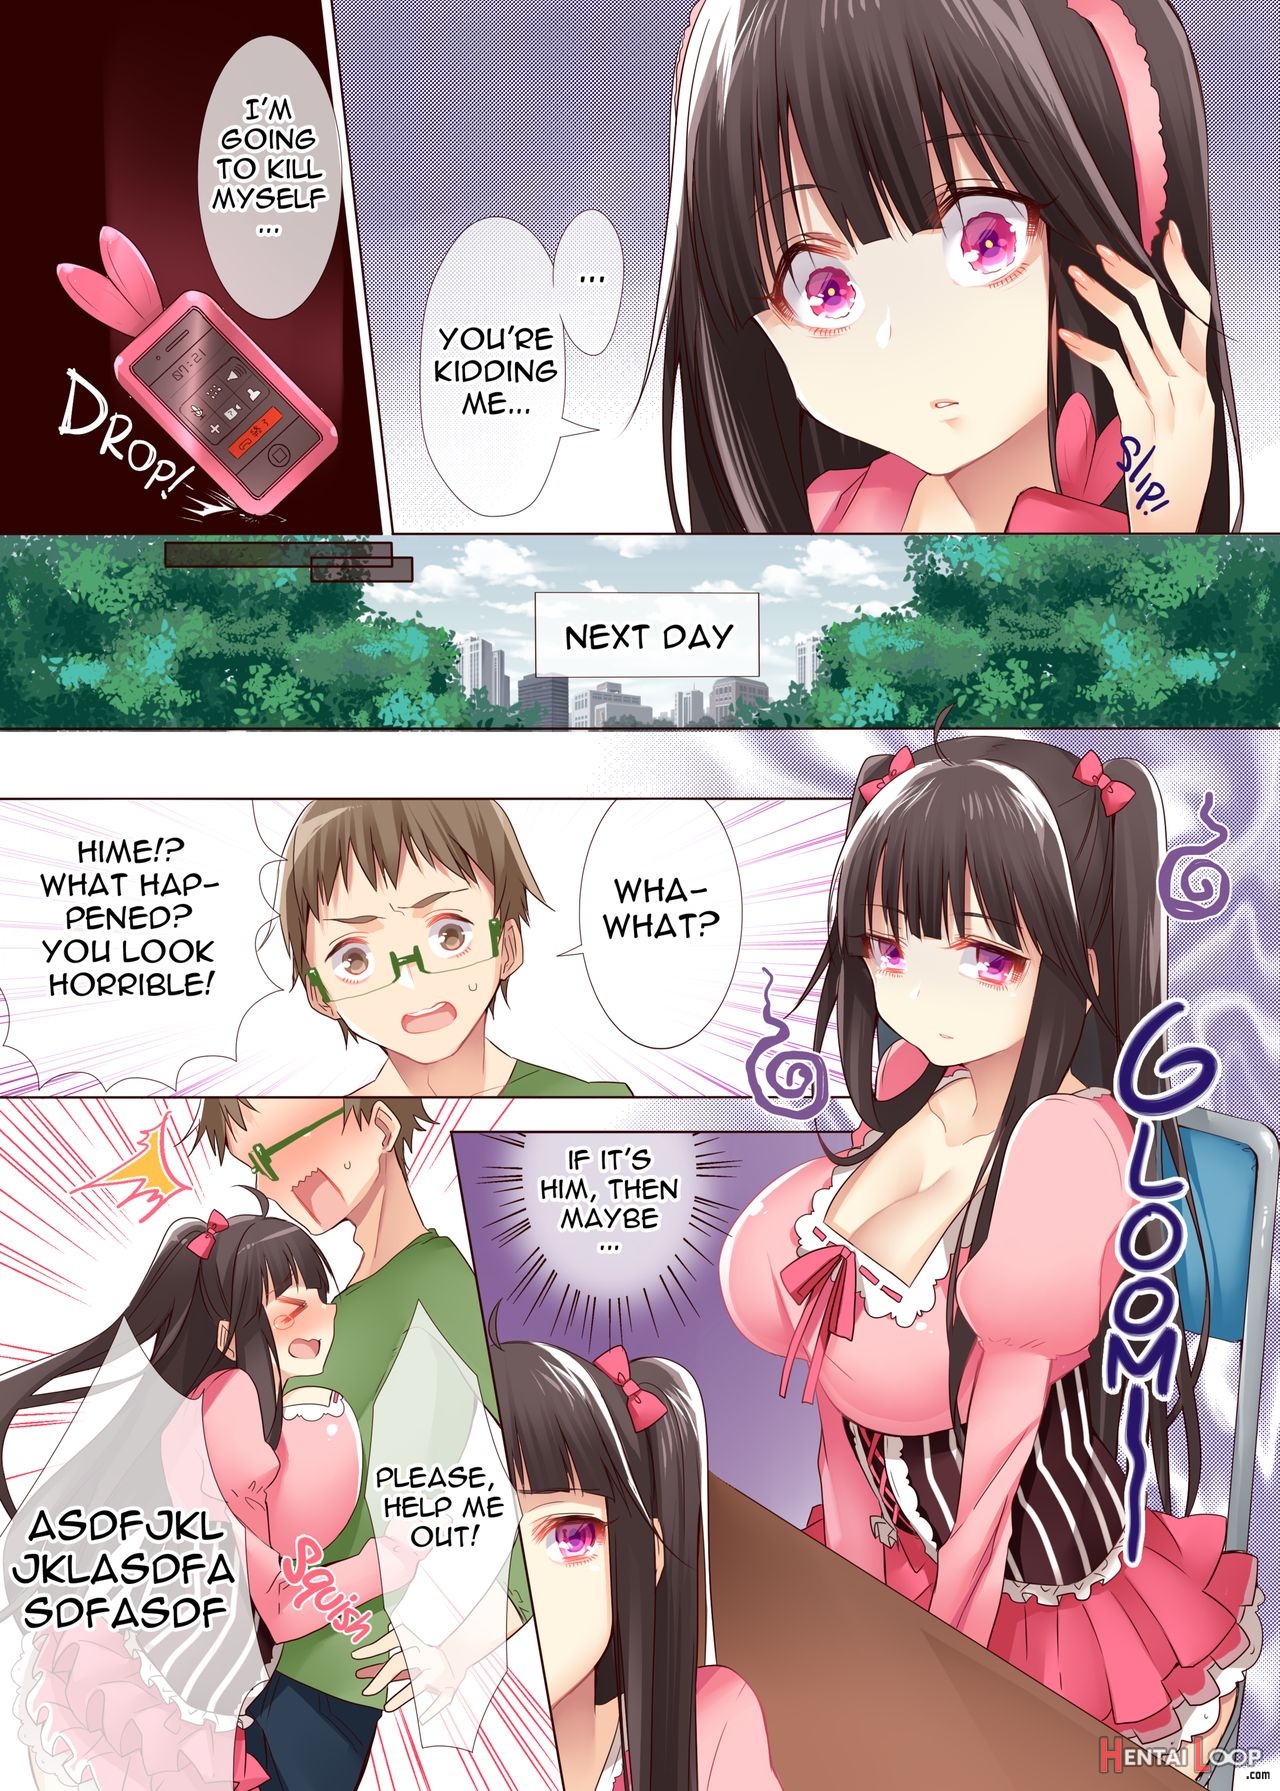 The Princess Of An Otaku Group Got Knocked Up By Some Piece Of Trash So She Let An Otaku Guy Do Her Too!? page 15